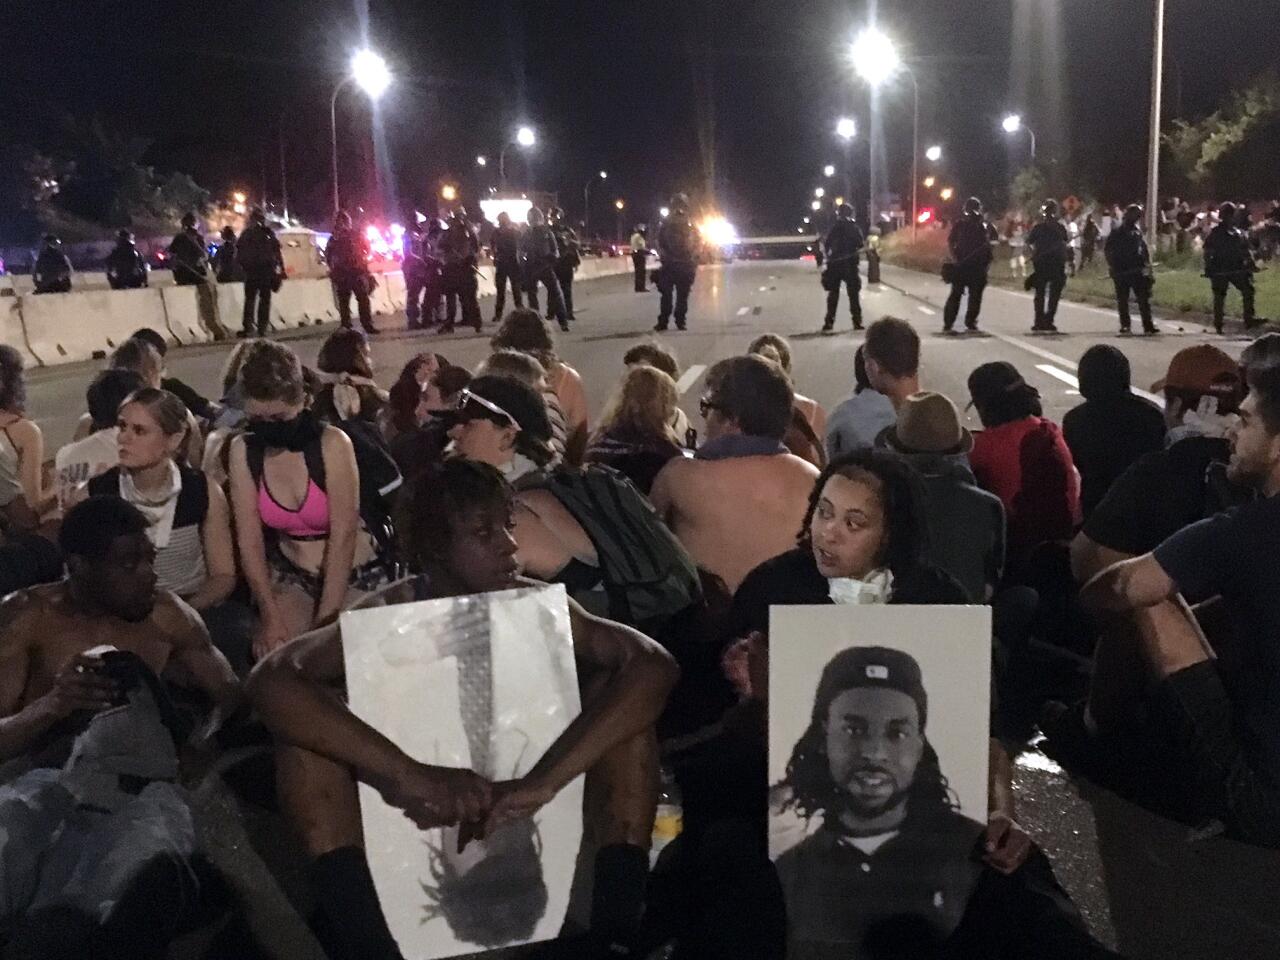 Protests over police shootings